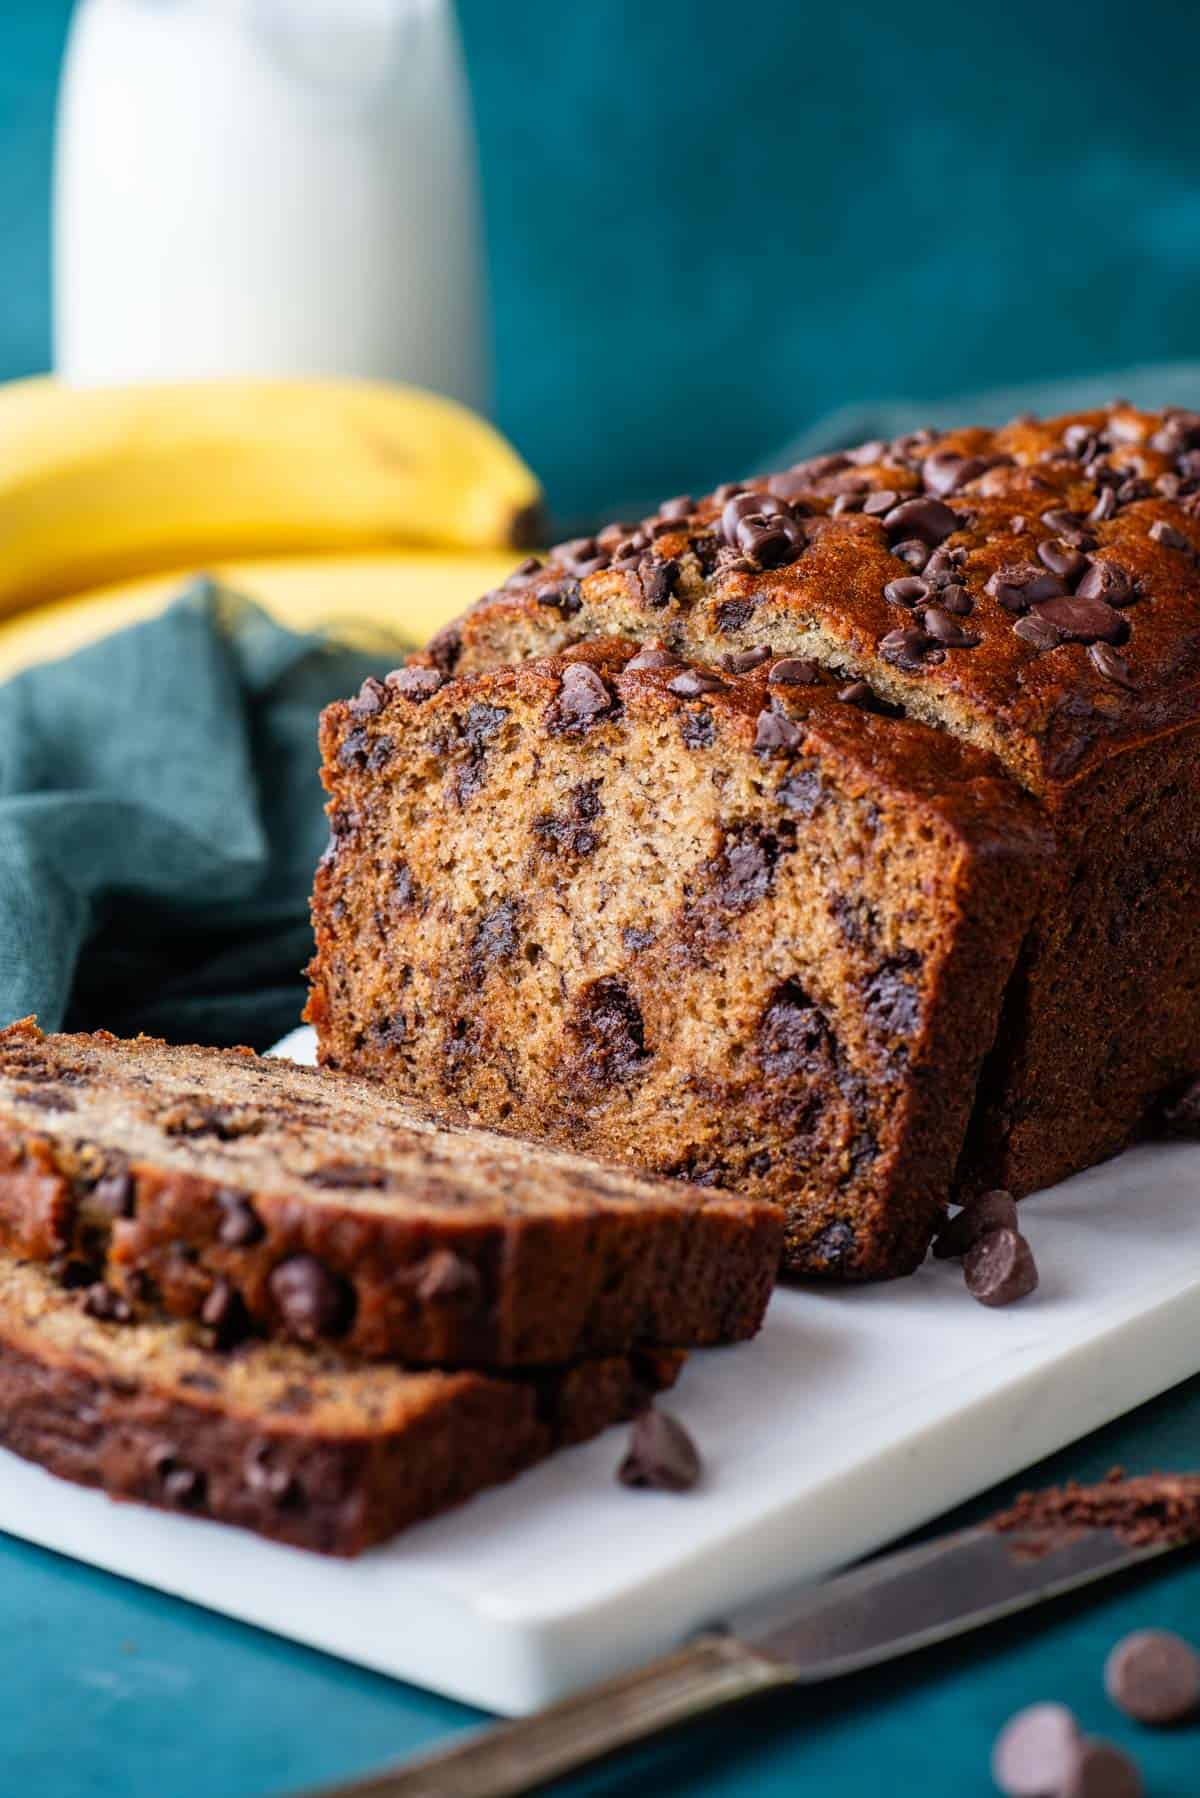 a loaf of chocolate chip banana bread on a white cutting board with a dark teal towel beside is, chocolate chips sprinkled around, and whole bananas and a glass of milk in the background